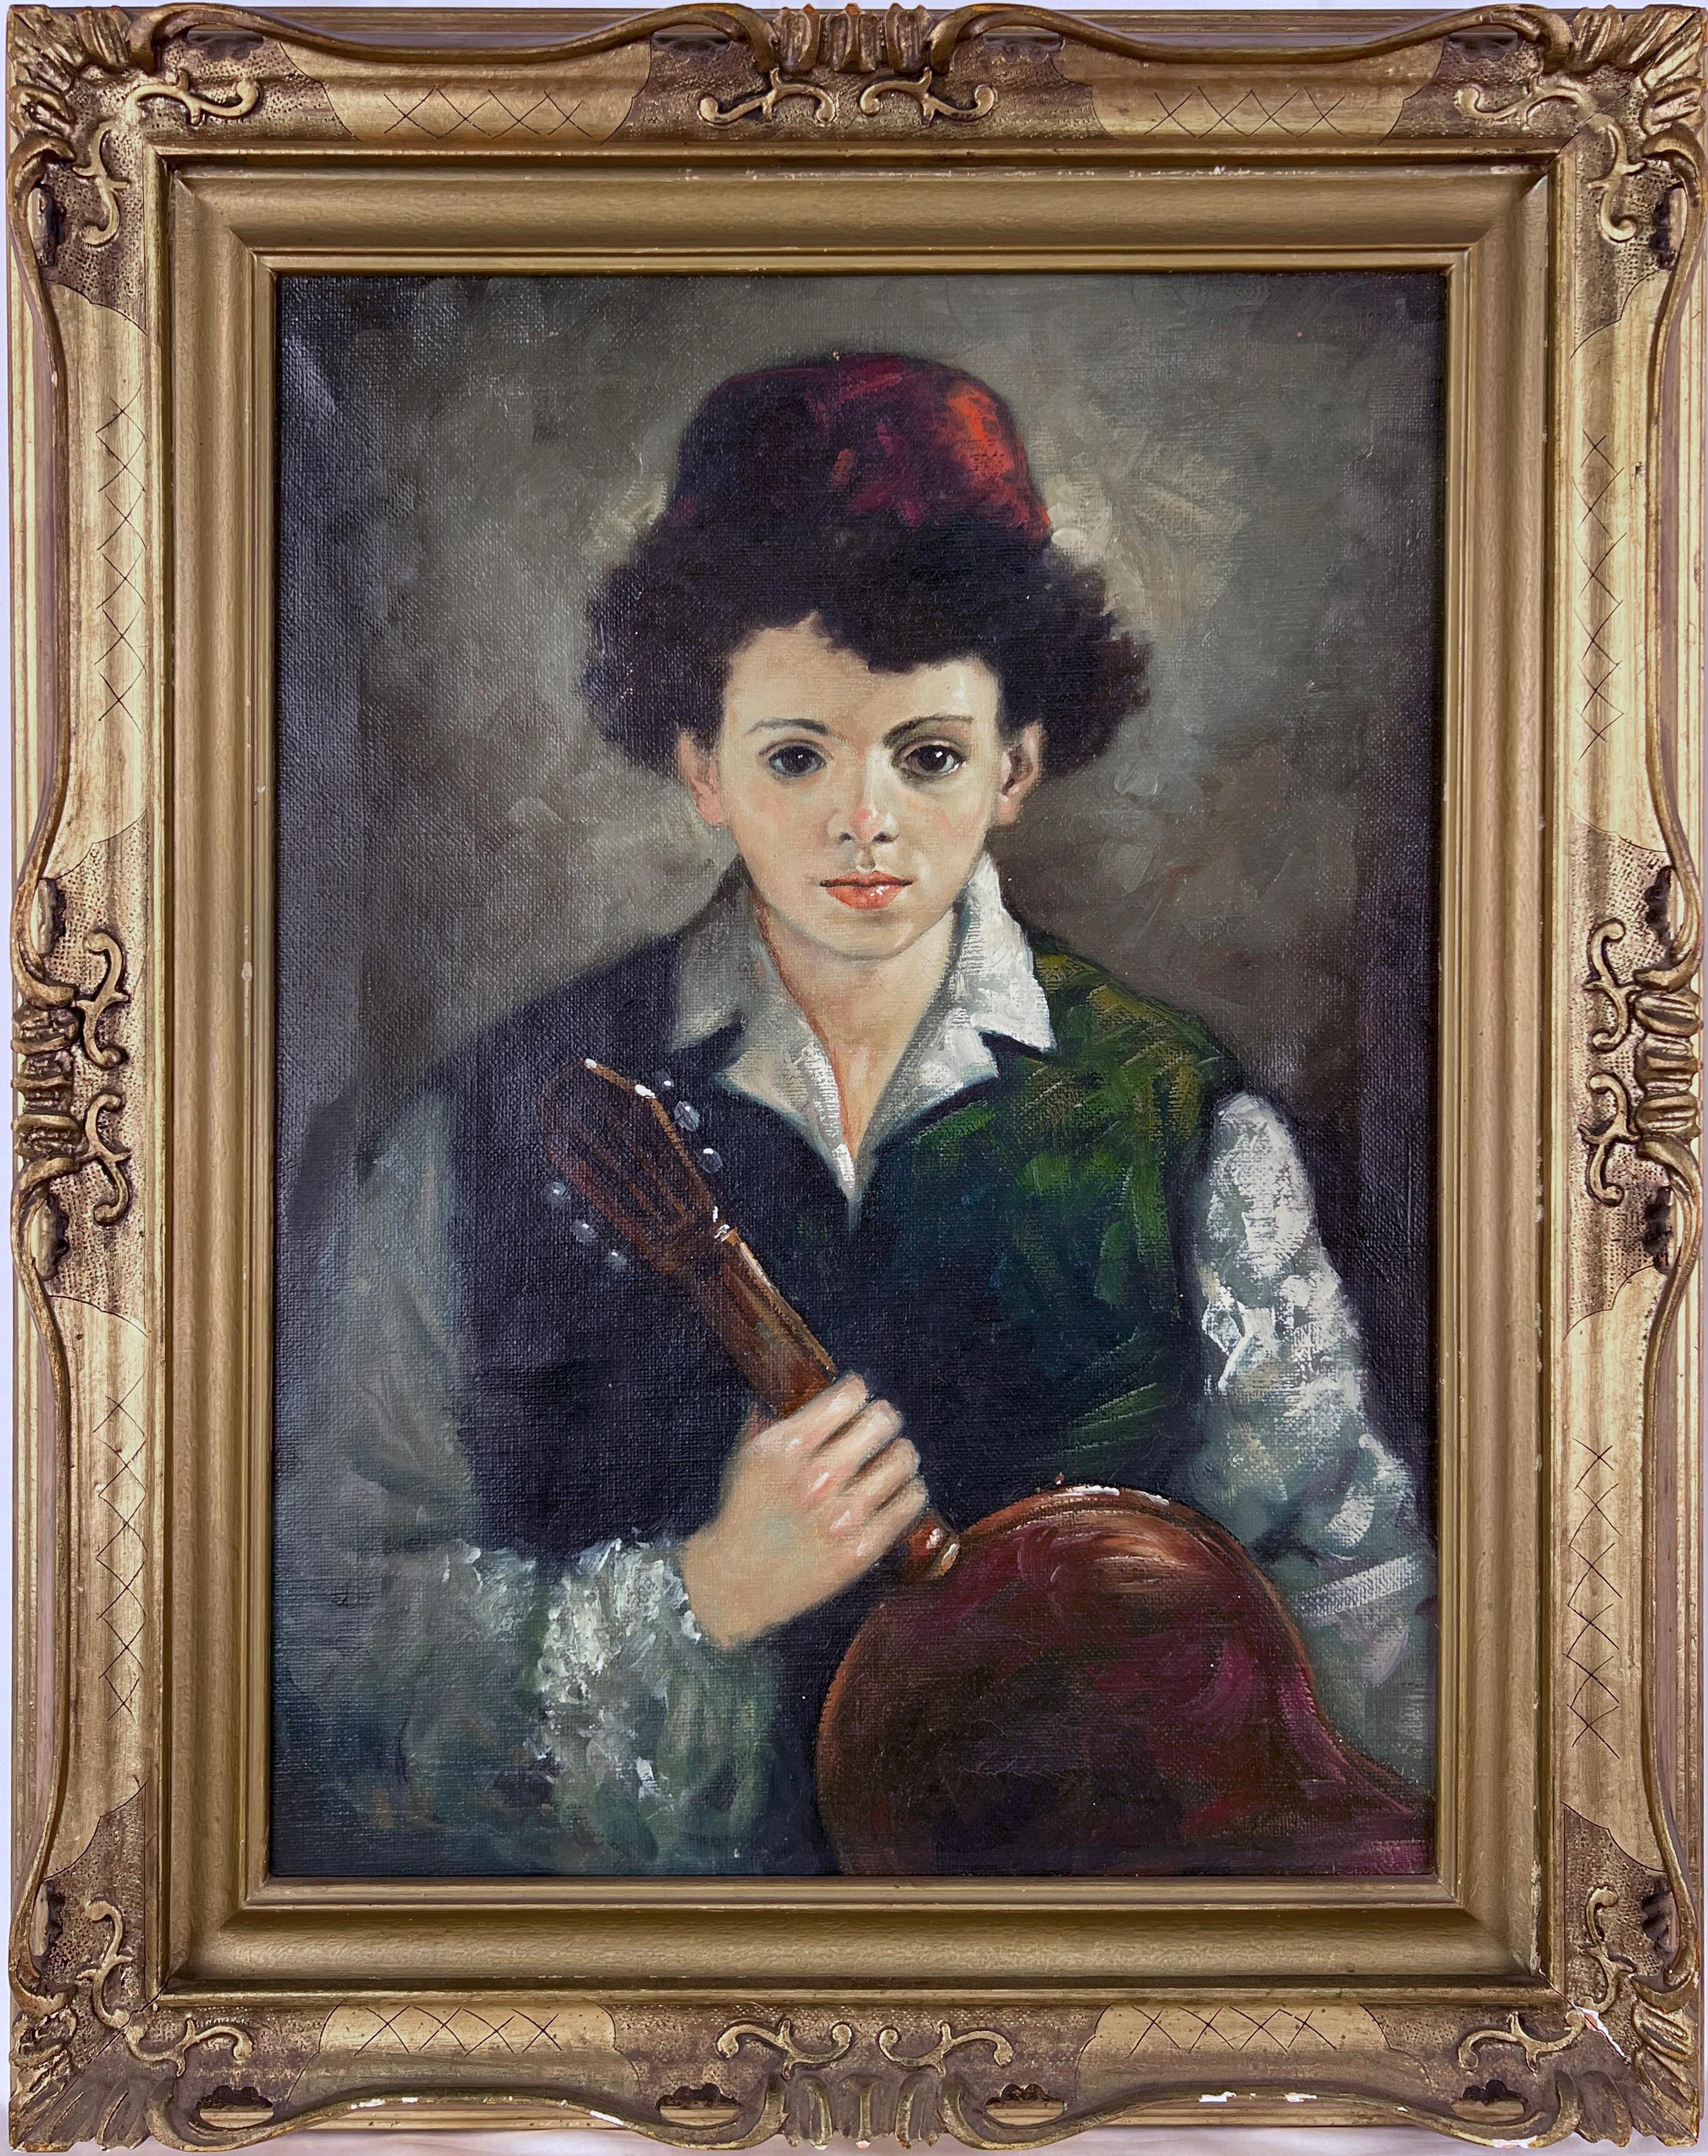 Portrait of Boy and Guitar Original oil by Angeli - Italy circa 1960

Classical portrait of a young boy ad his guitar by Angeli, an unknown Italian painter (Italy, 20th Century). Rocco style frame highlights an Italian artists rendition of a young